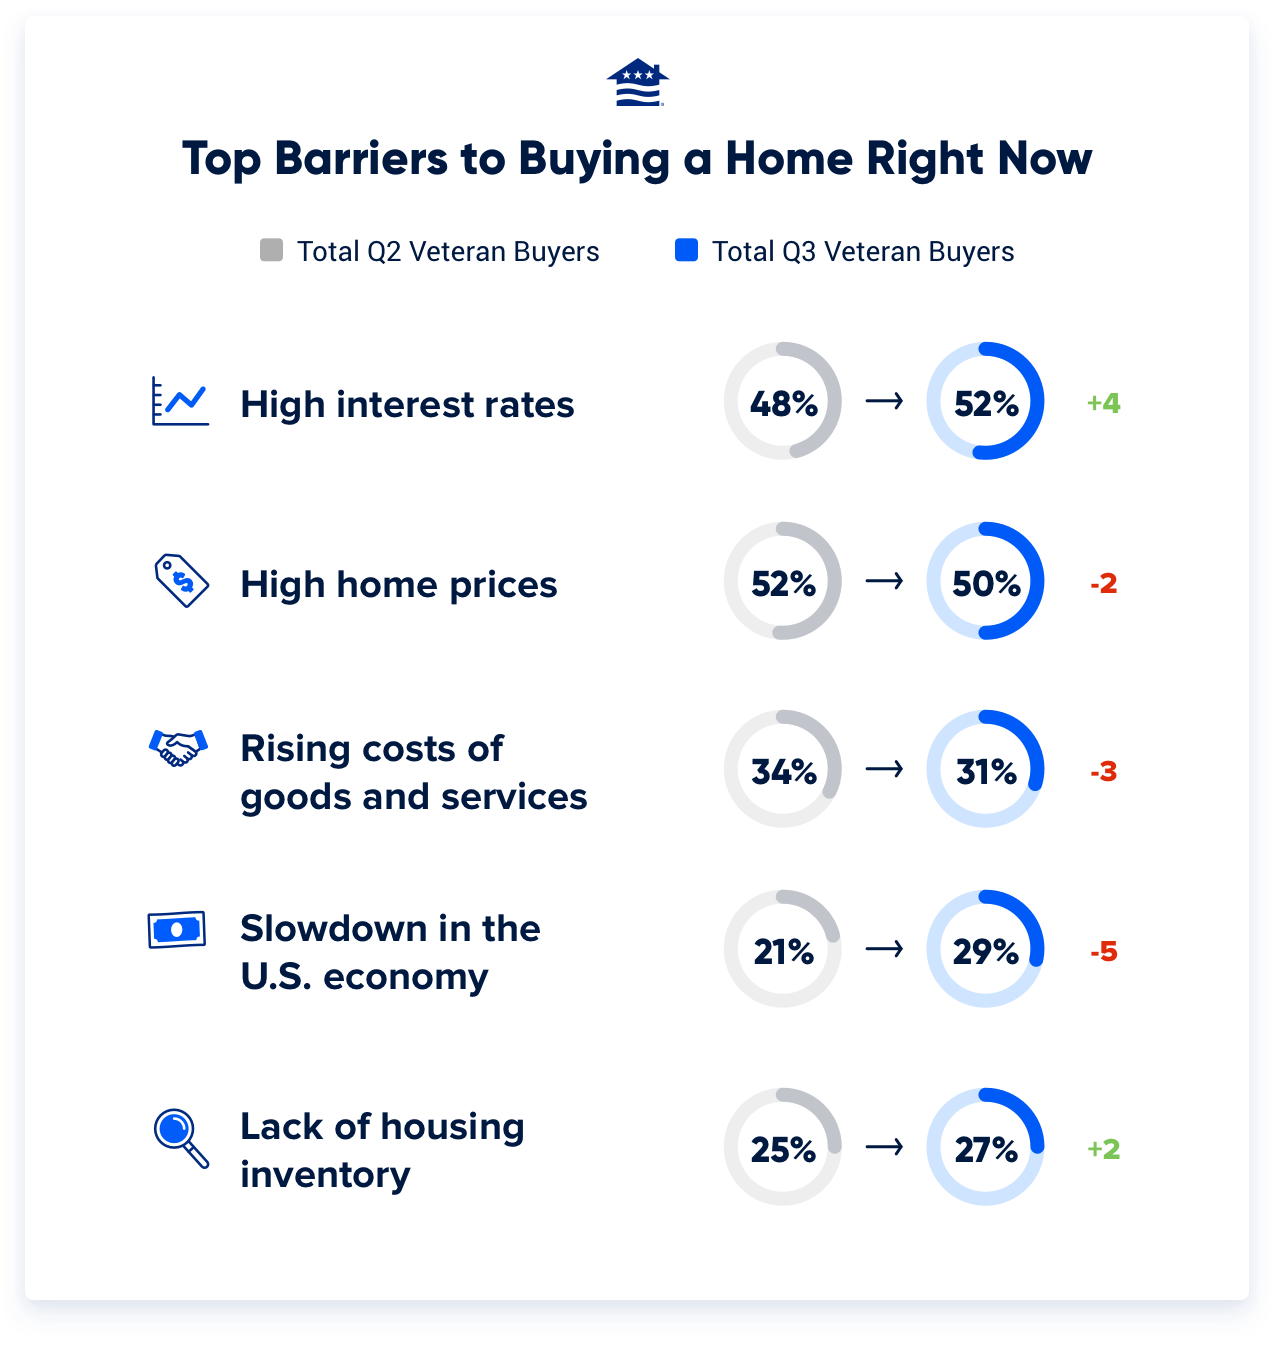 Veterans (Q2) Veterans (Q3) What are the primary barriers to buying a home right now?     High interest rates 48% 52% High home prices 52% 50% Decline in stock prices 8% 8% Loss of a job 6% 5% Lack of housing inventory 25% 27% Concern about finances right now 16% 17% Concern about finances in the next few years 17% 15% Rising costs of goods and services 34% 31% Slowdown in the U.S. economy 21% 29%AB Costs related to obtaining a new home (ex: closing costs, inspection, appraisal, legal, etc.)  29% 24%